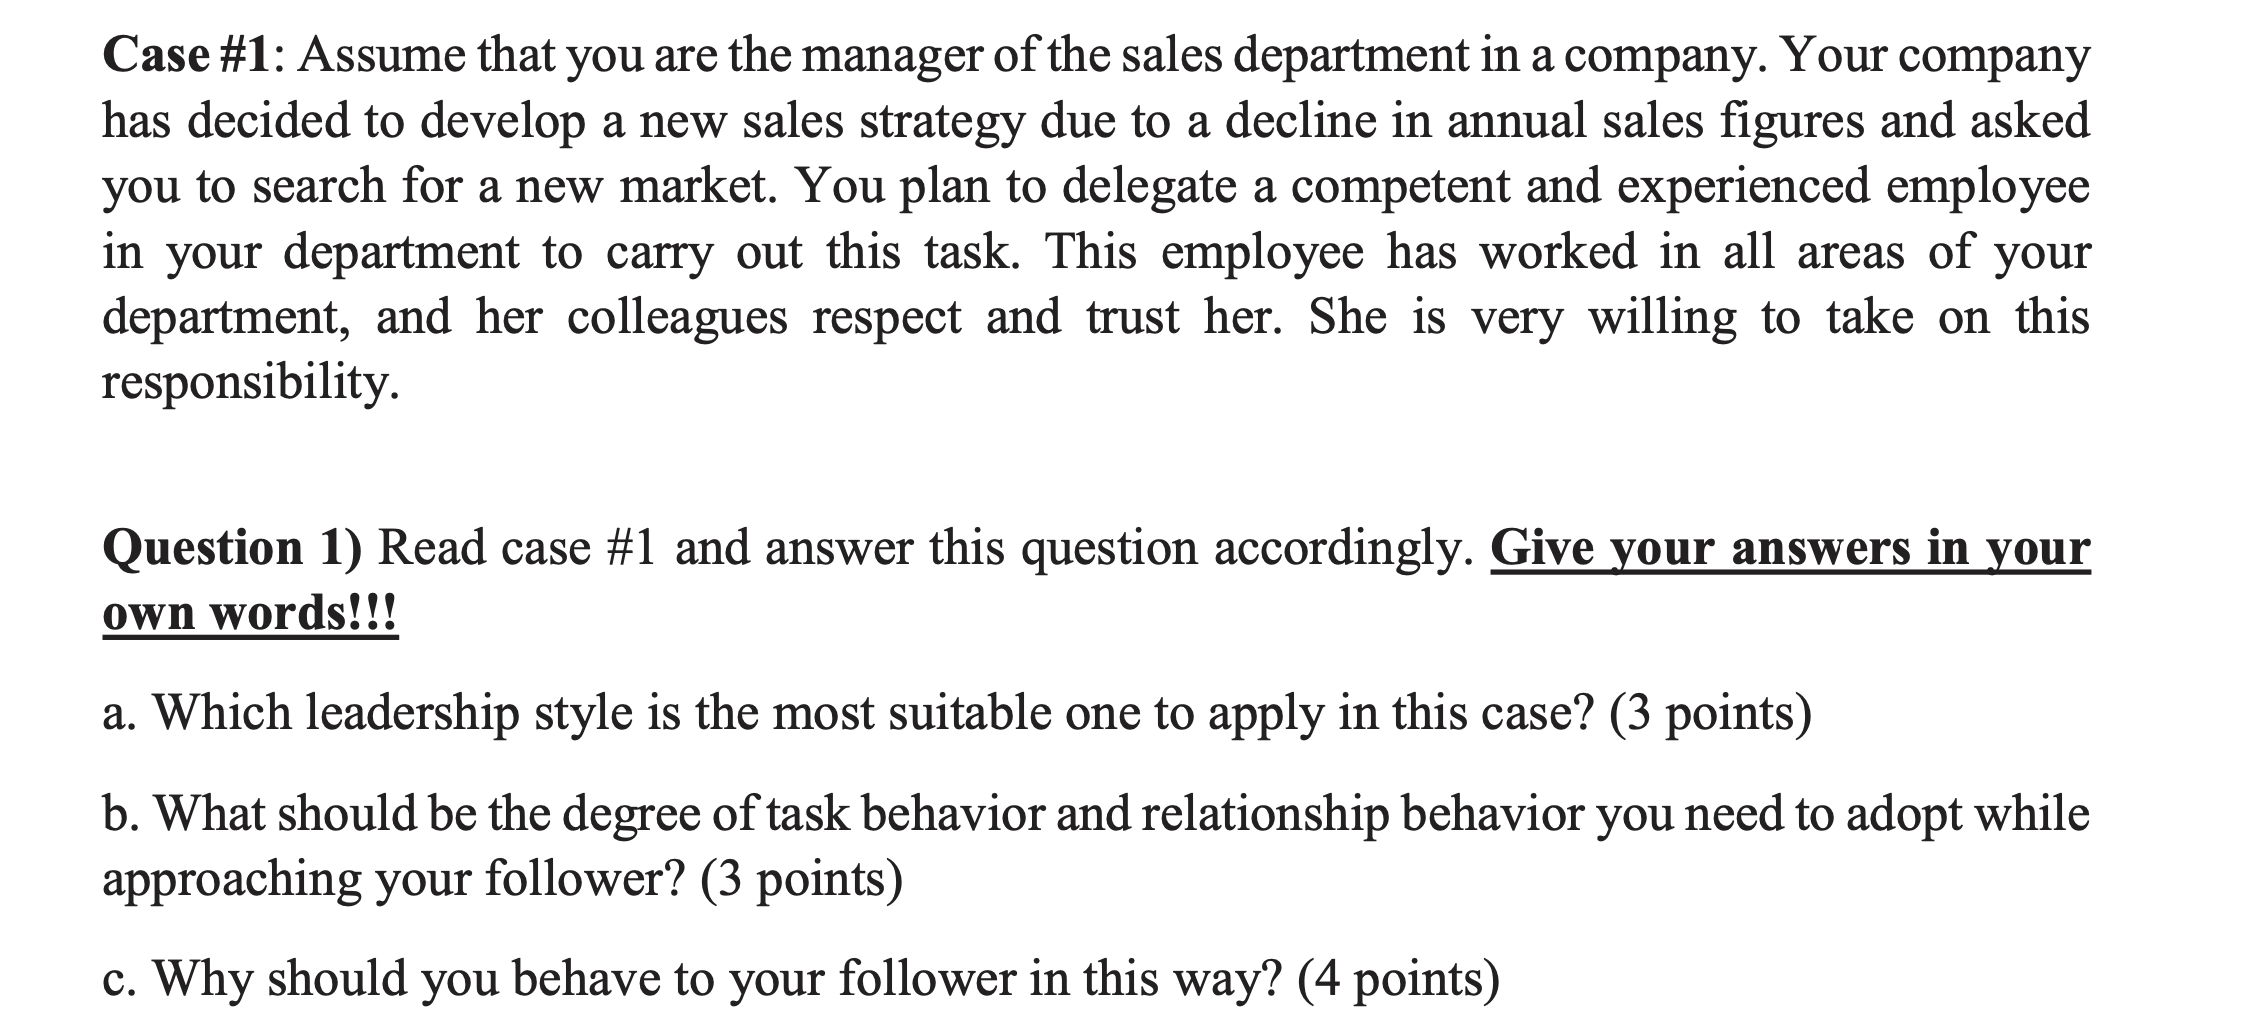 Assume that you are the manager of the sales department in a company. Your company has decided to...